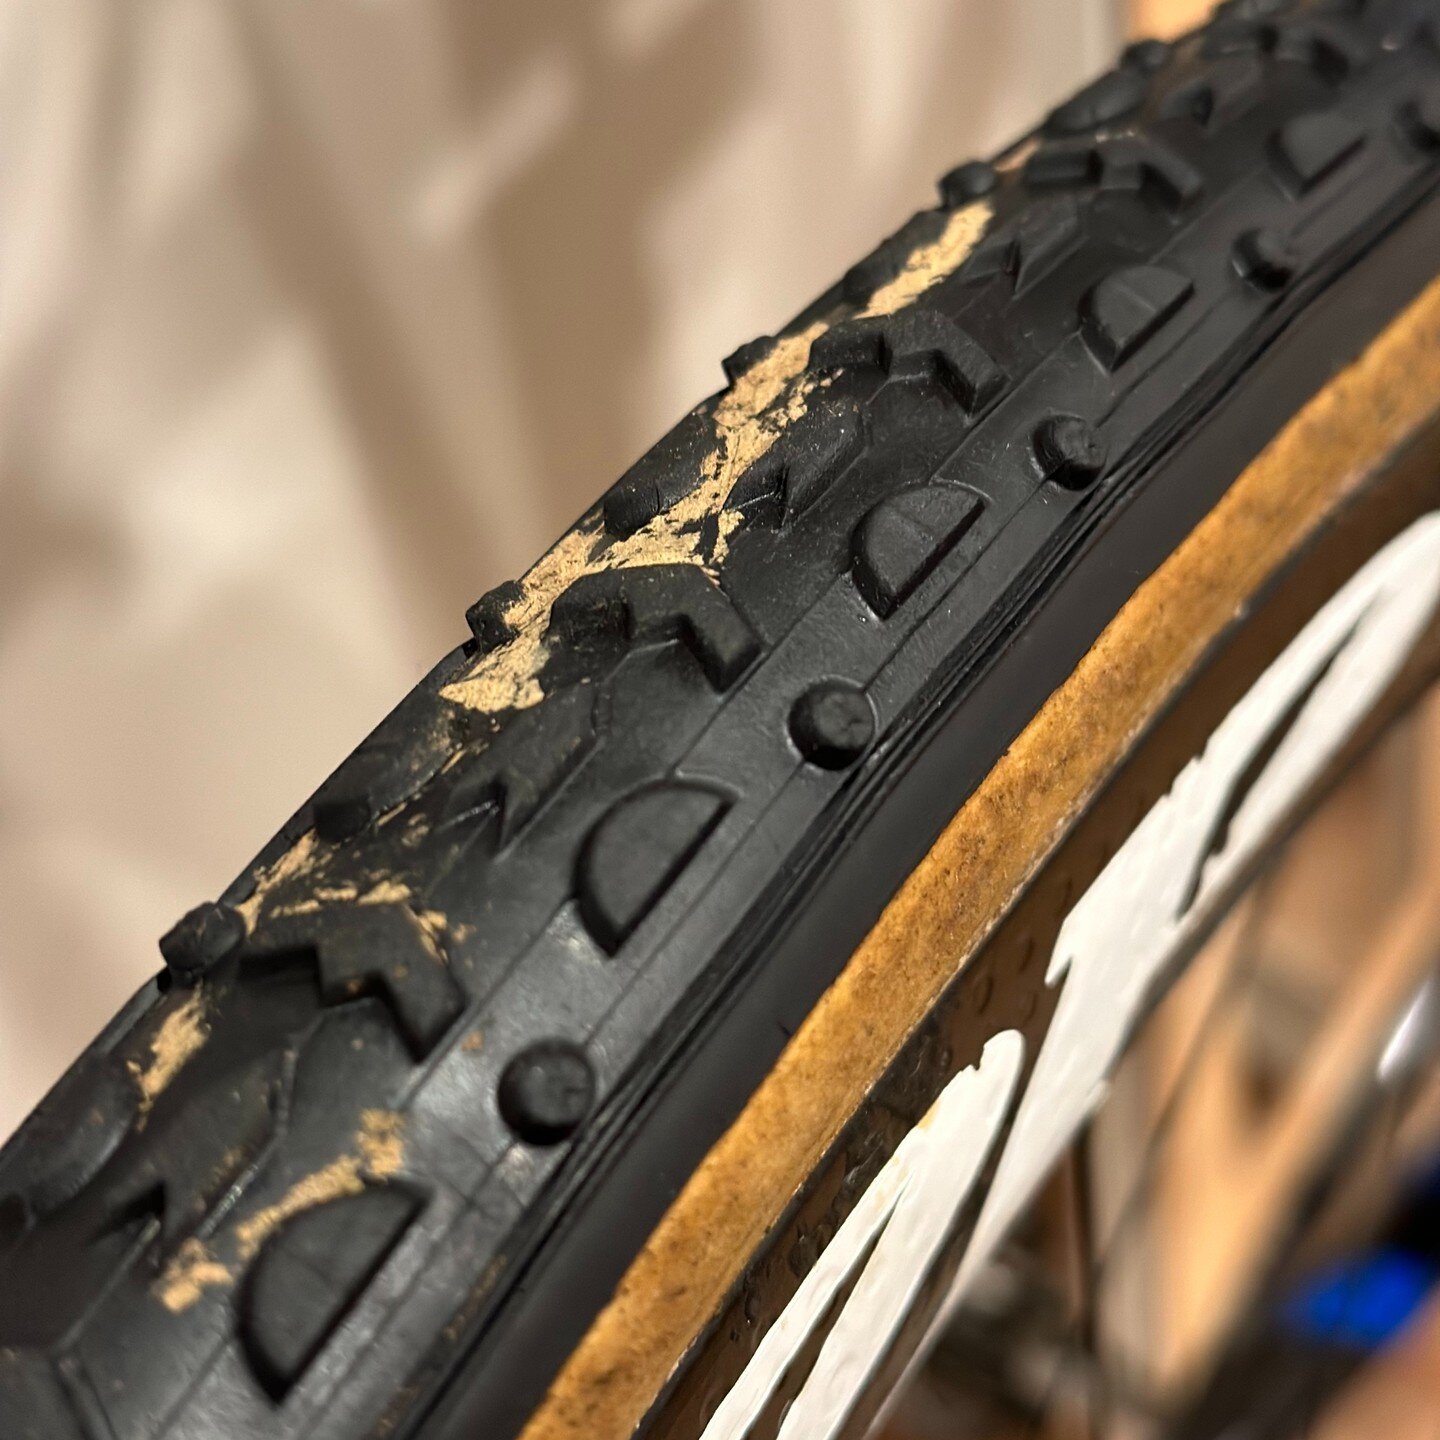 There&rsquo;s still mud on Magnus&rsquo;s tires from last year&rsquo;s Cyclocross World Championships in Hoogerheide, NL.

His bikes are washed, tires scrubbed, drivetrain greased and lubed. Bikes are always race ready. The mud just doesn&rsquo;t wan